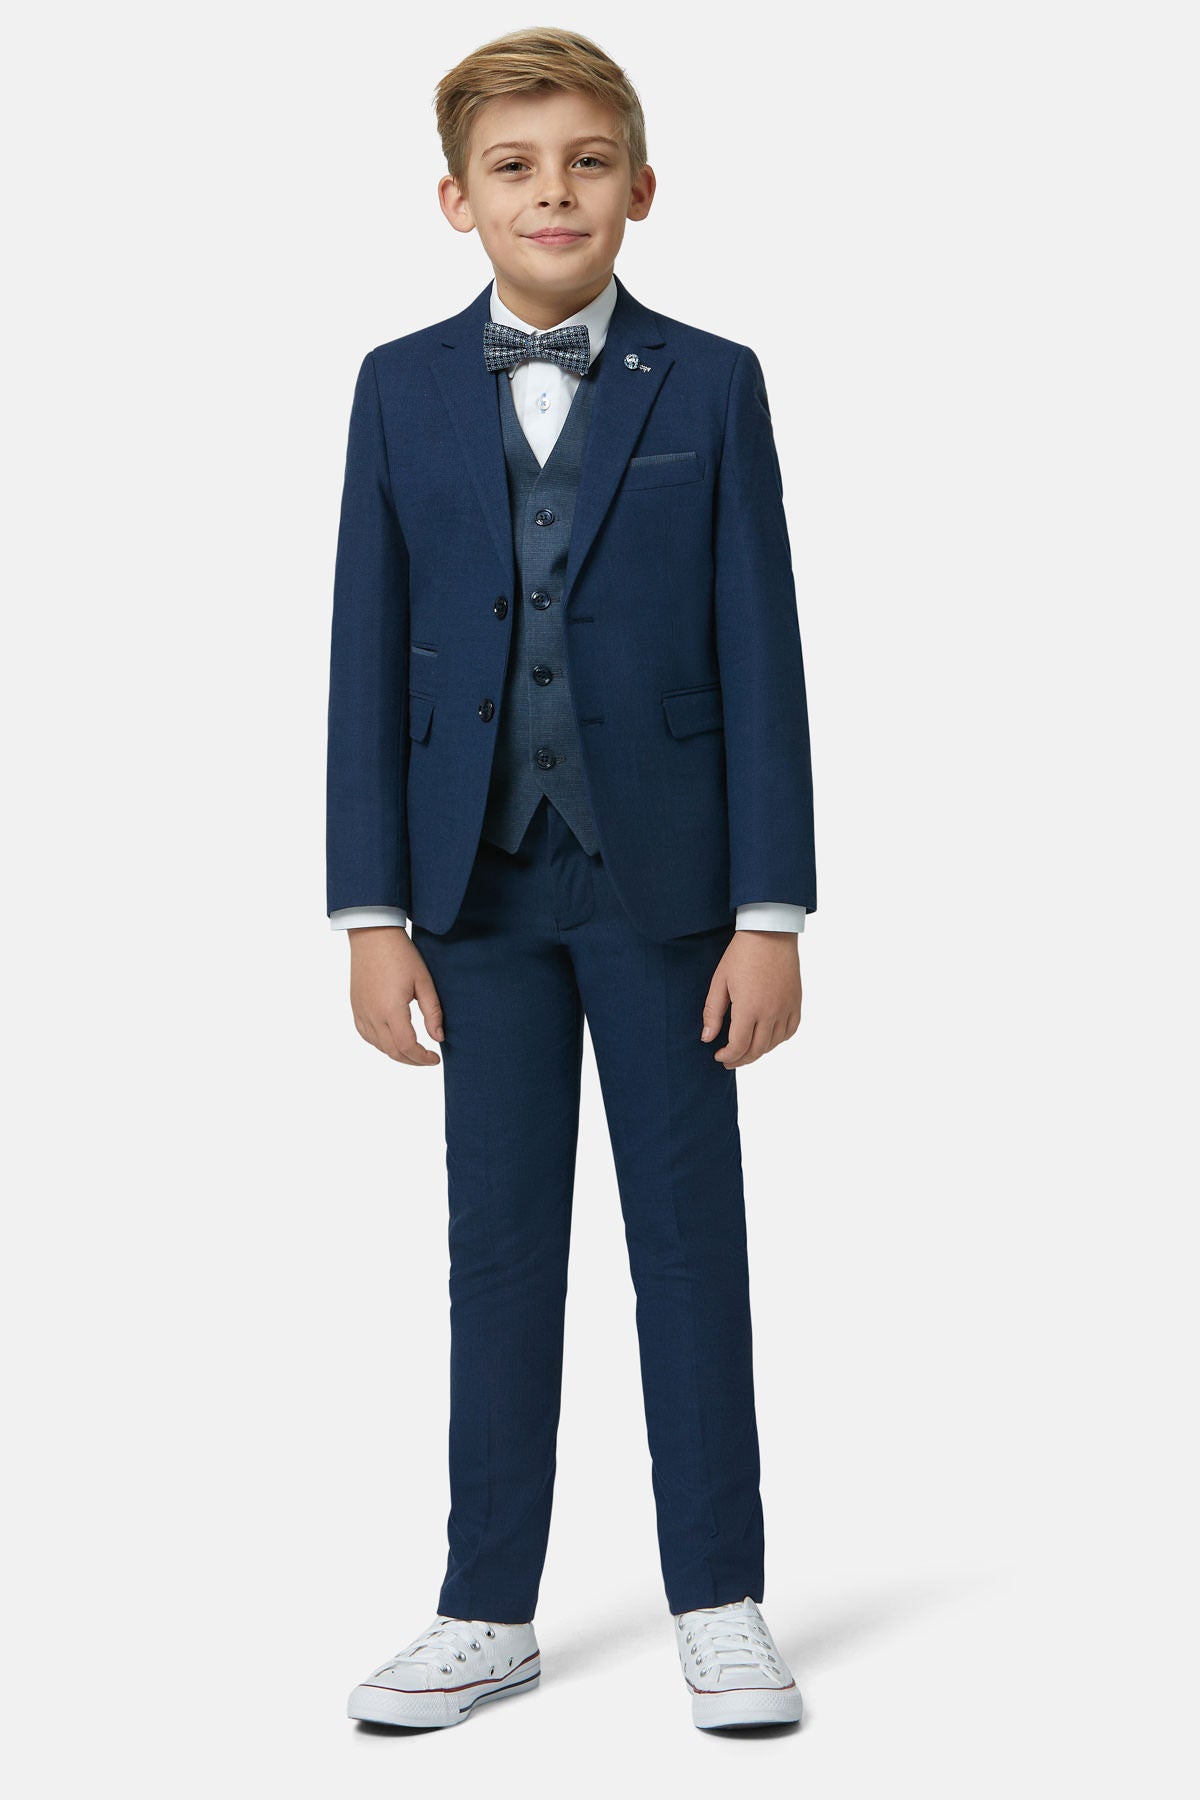 Boys Ronnie Teal 3 Piece Suit by Benetti